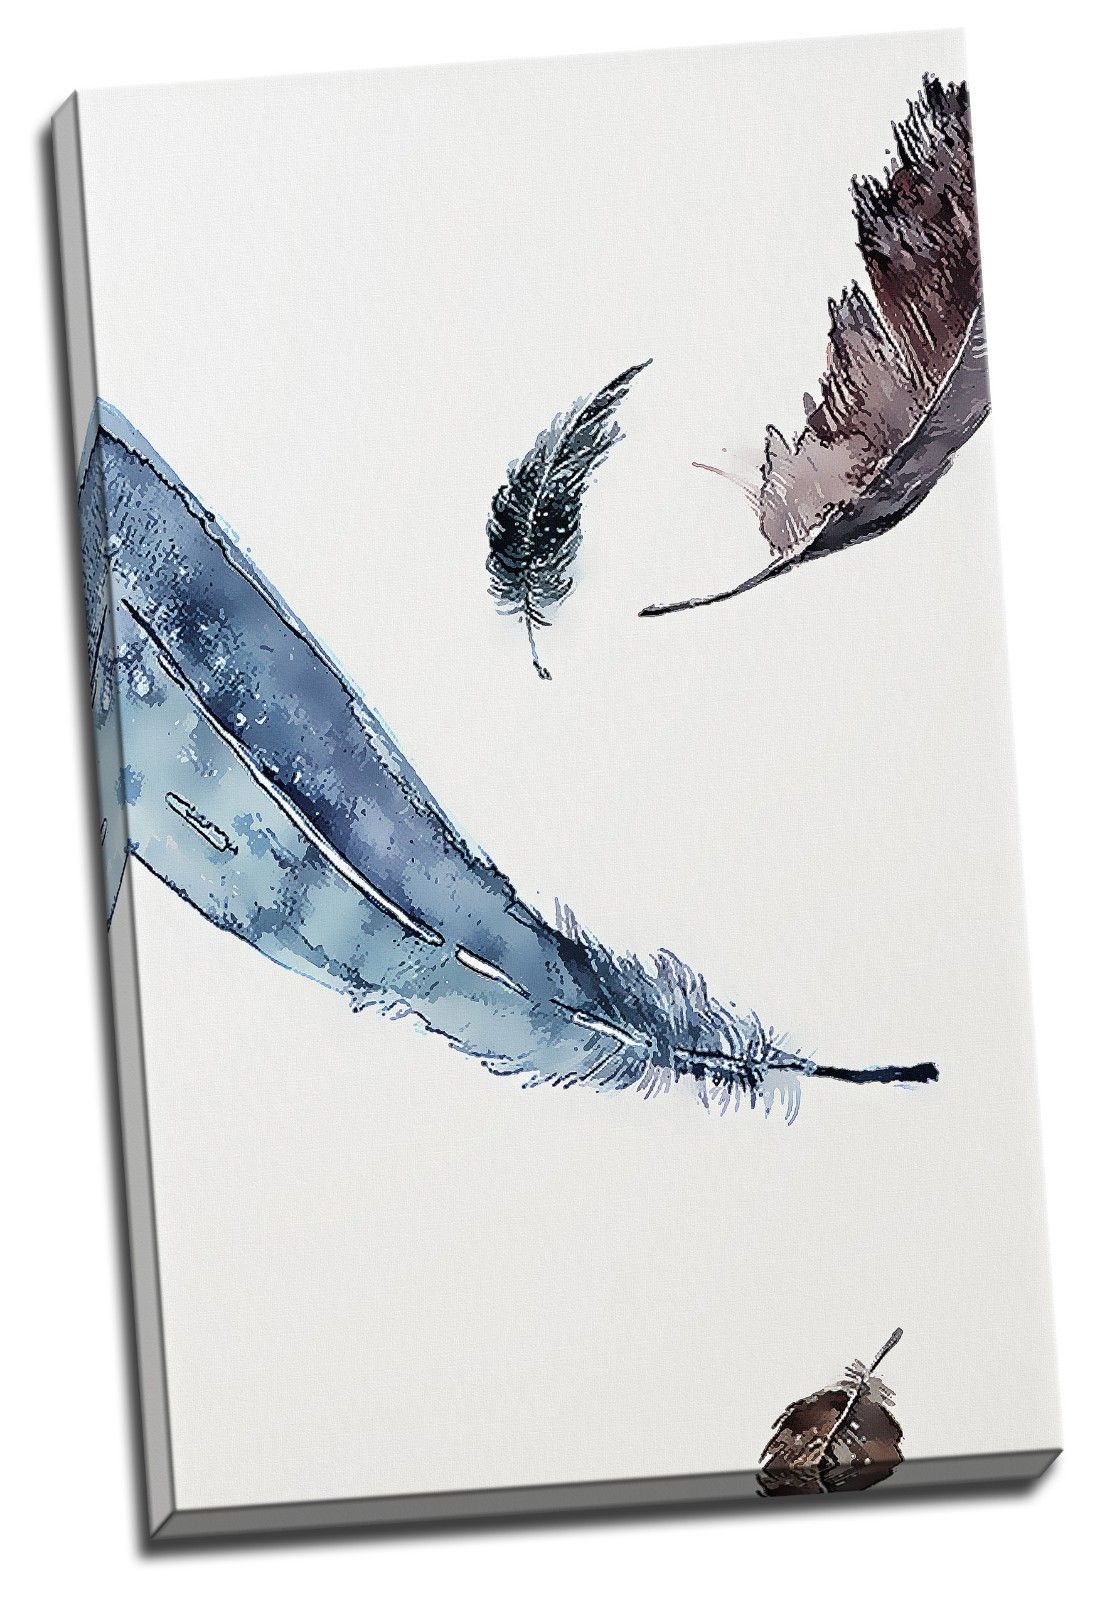 Watercolour Blurred Feather Framed Canvas Prints Modern Wall Art Home Decor